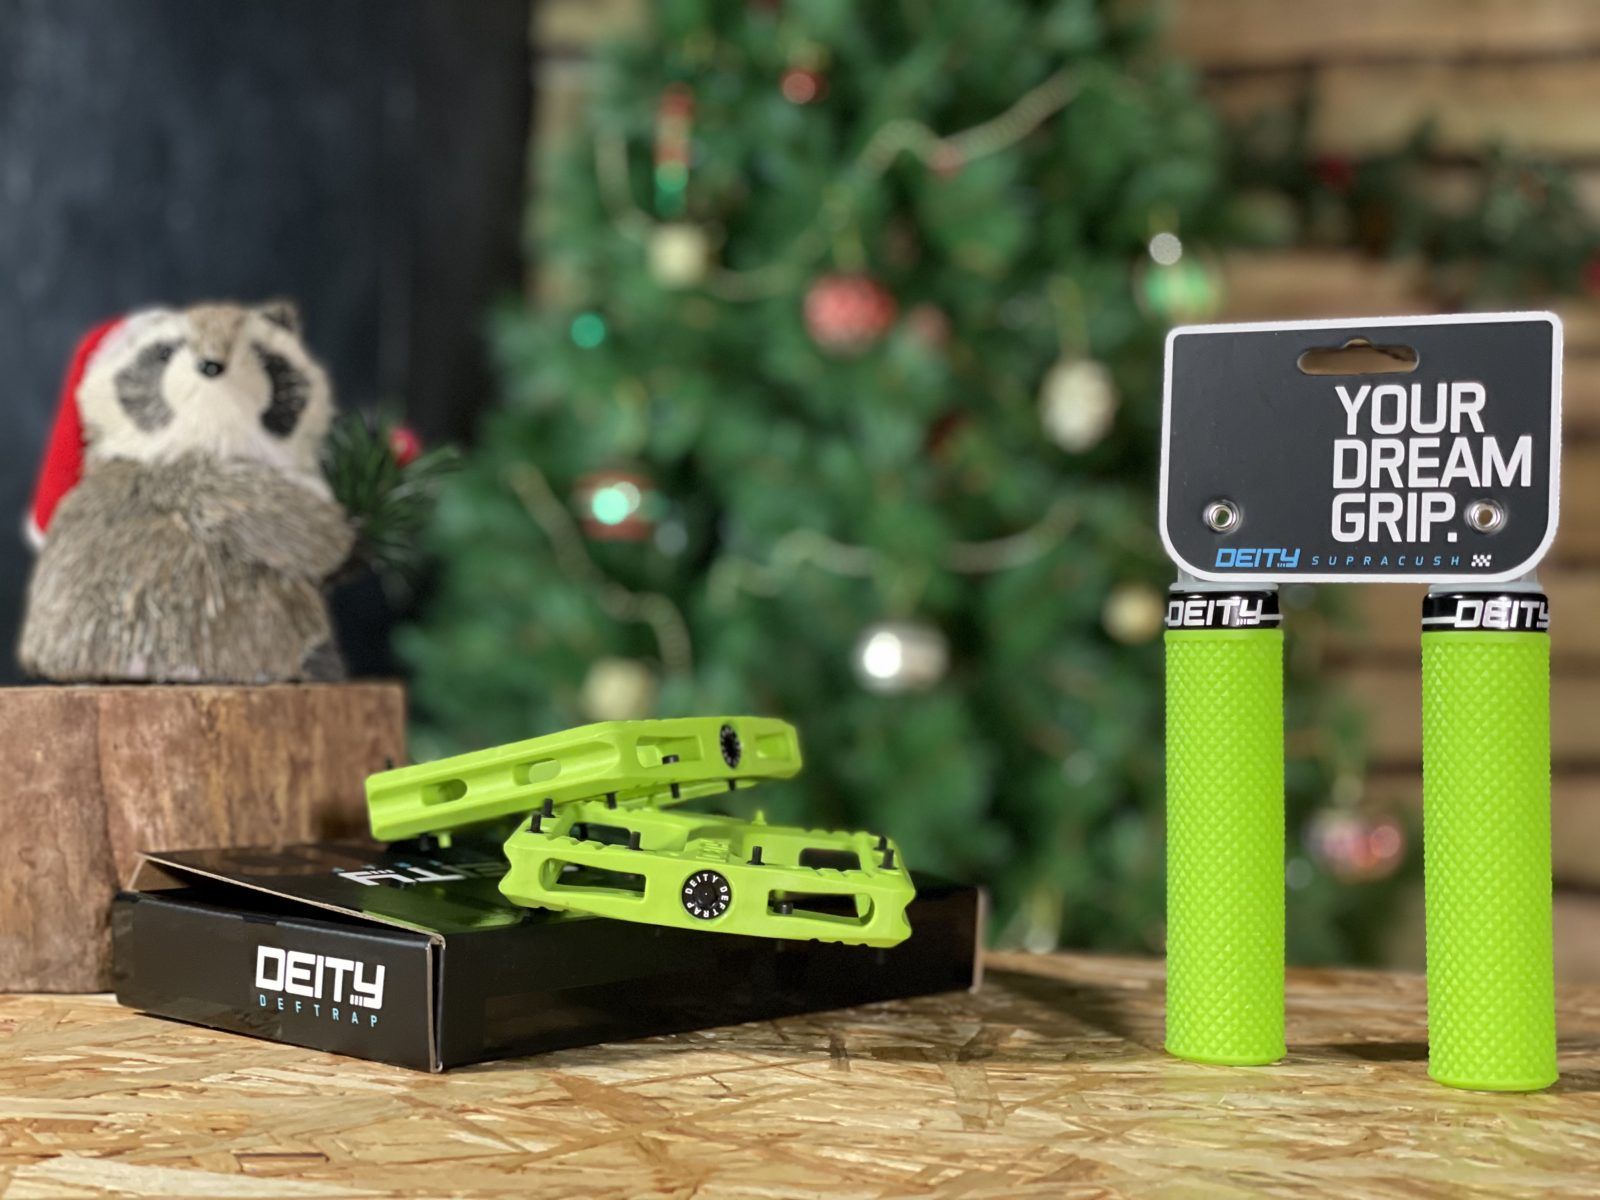 deity pedals grips christmas countdown 2020